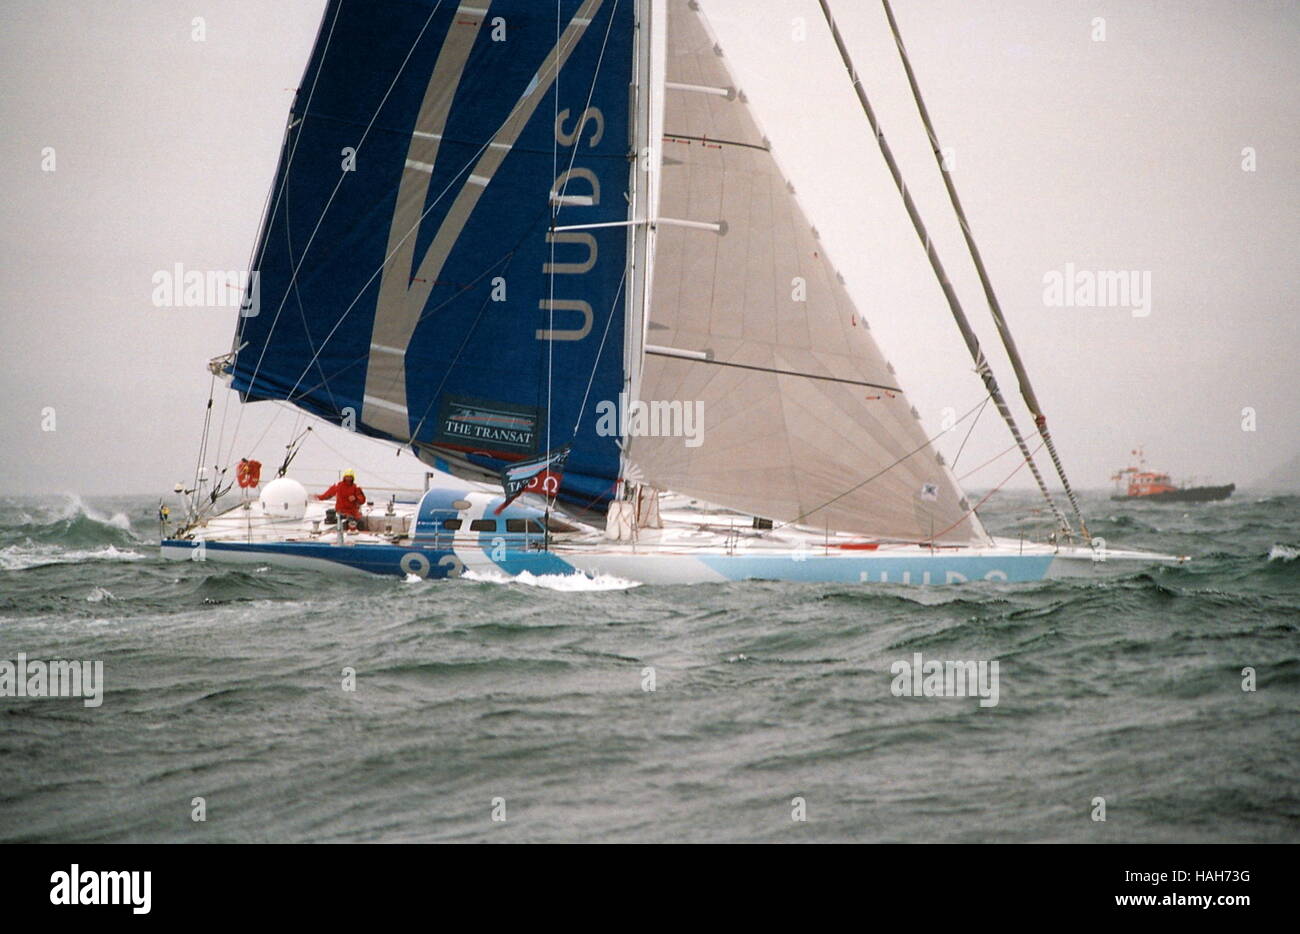 AJAX NEWS PHOTOS. 31ST MAY 2004. PLYMOUTH, ENGLAND. - TRANSAT YACHT RACE - UUDS IN HEAVY WEATHER AT START. PHOTO:JONATHAN EASTLAND/AJAX  REF:TC4296 8 4A Stock Photo